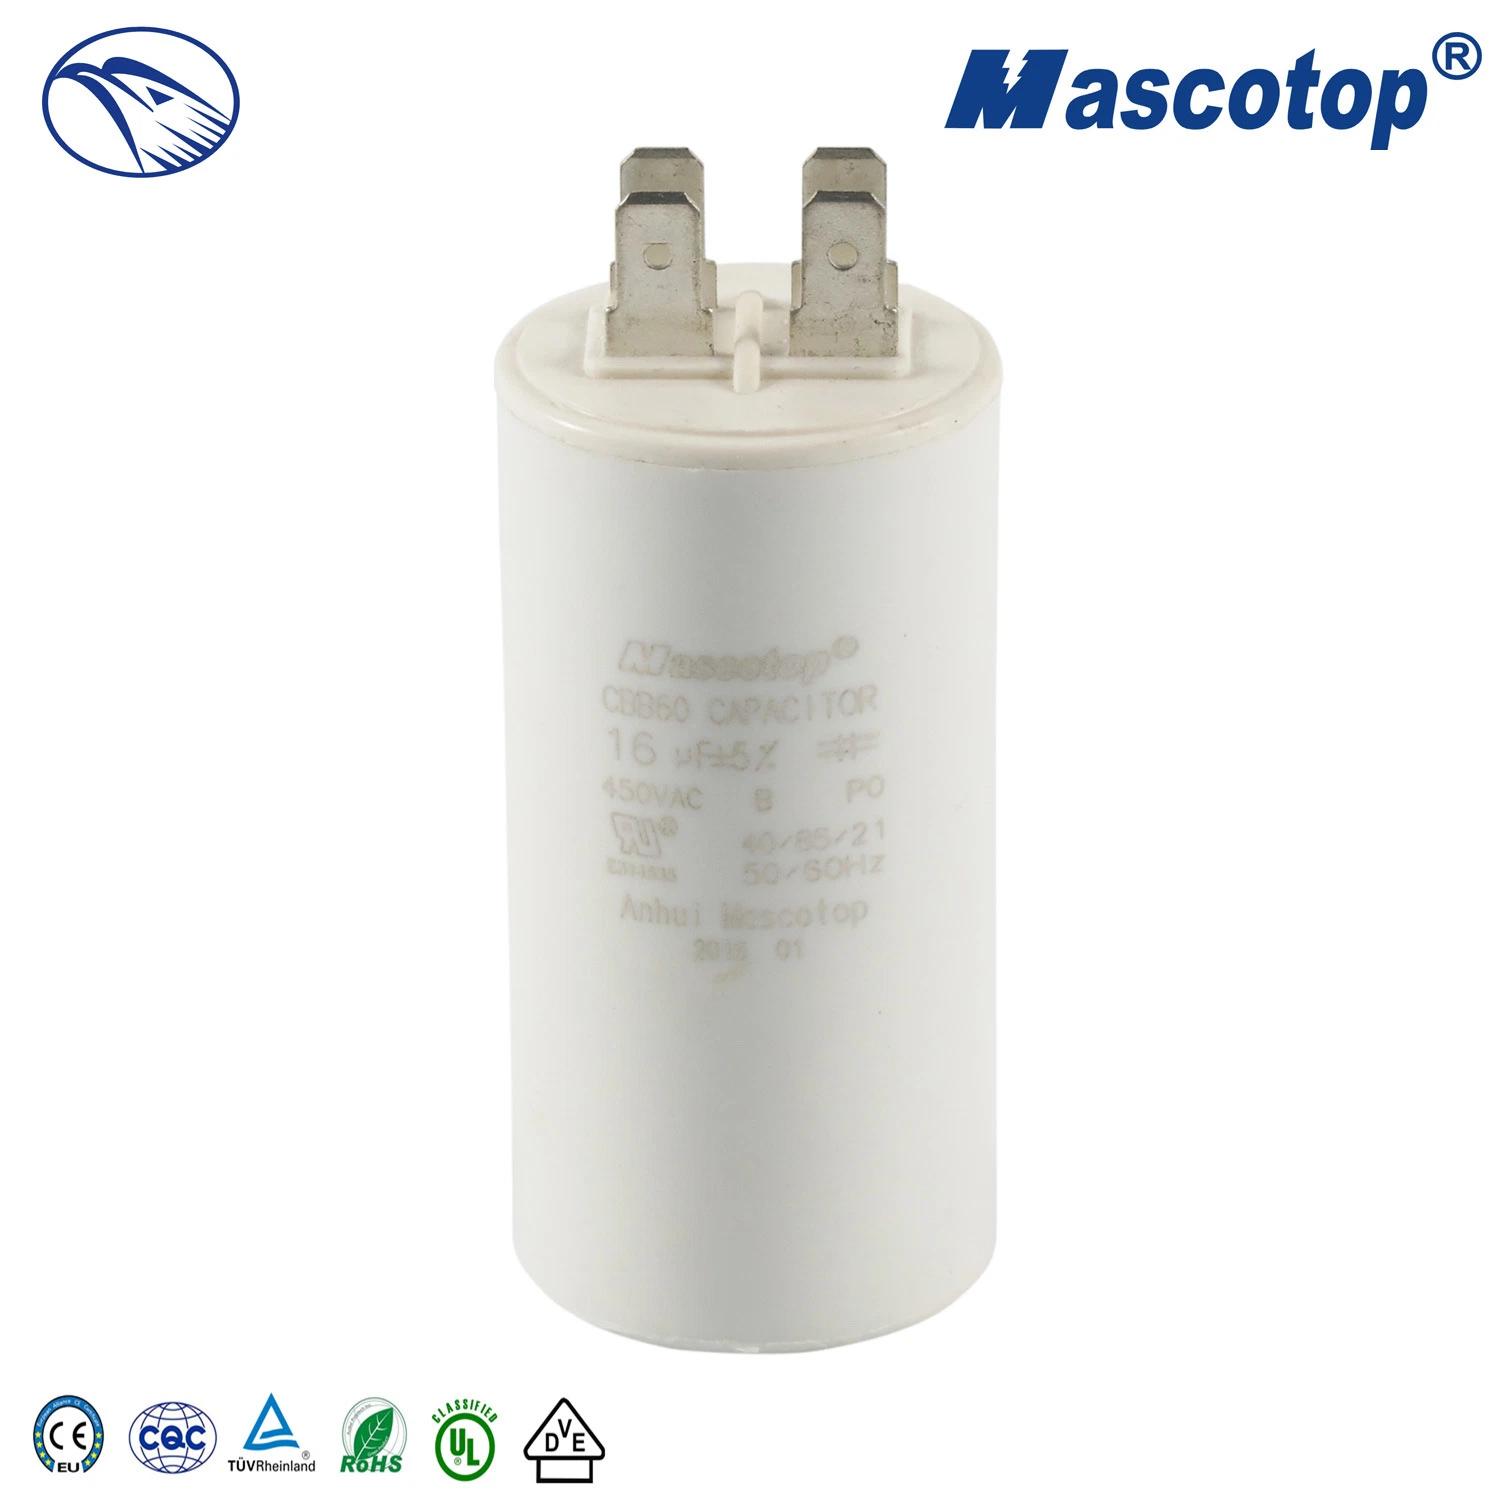 Widely Used Cbb60 Capacitor with Steady Electric Performance